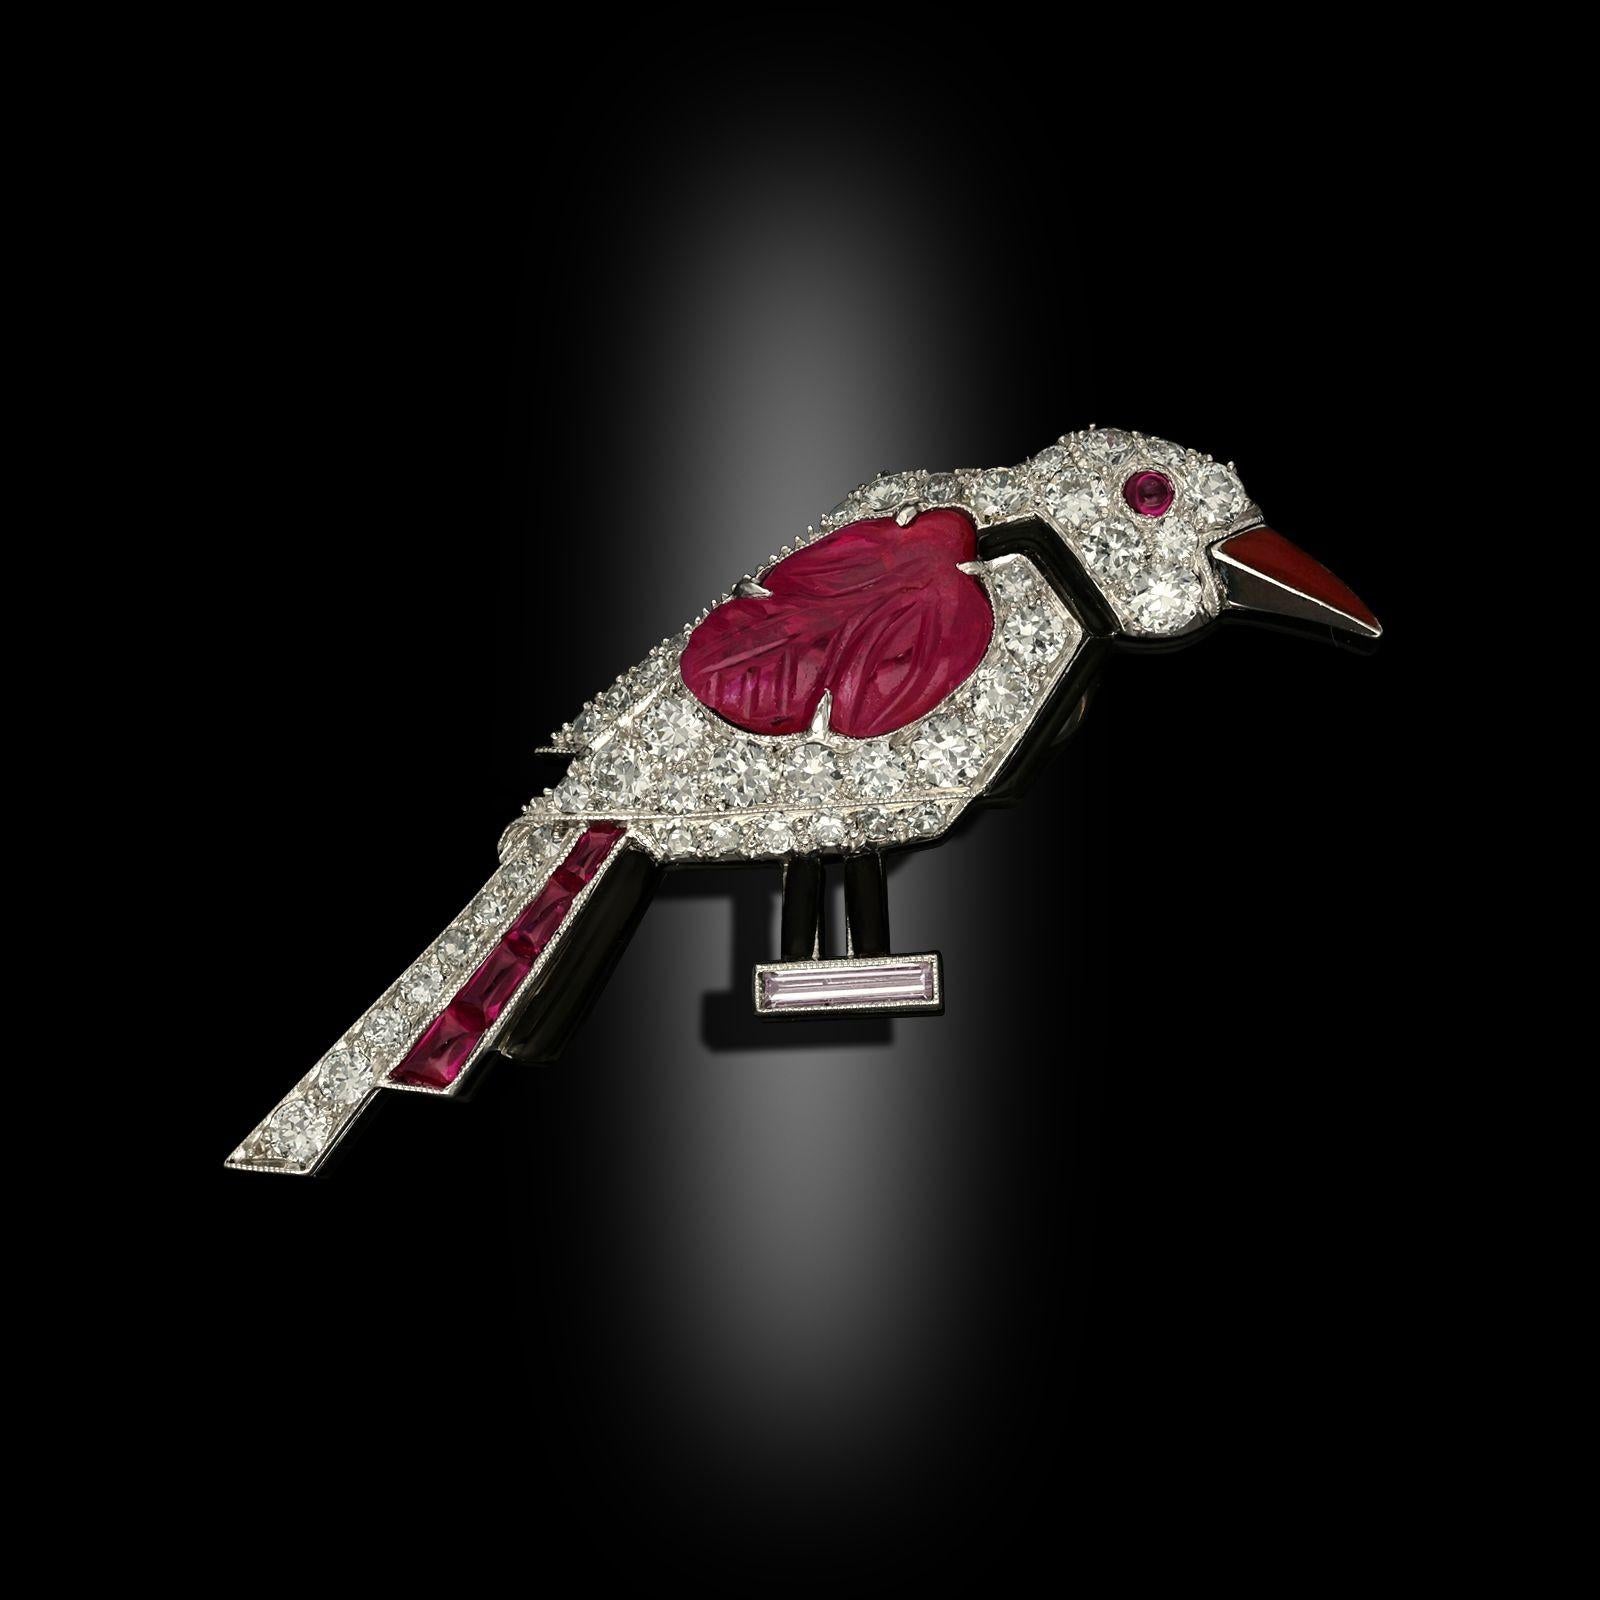 An Art Deco stylised bird brooch by Cartier London circa 1925. The brooch is designed as a standing bird in profile, it is set with old European cut diamonds, a carved ruby as a wing, accents of onyx, buff top rubies and a cabochon ruby eye, the